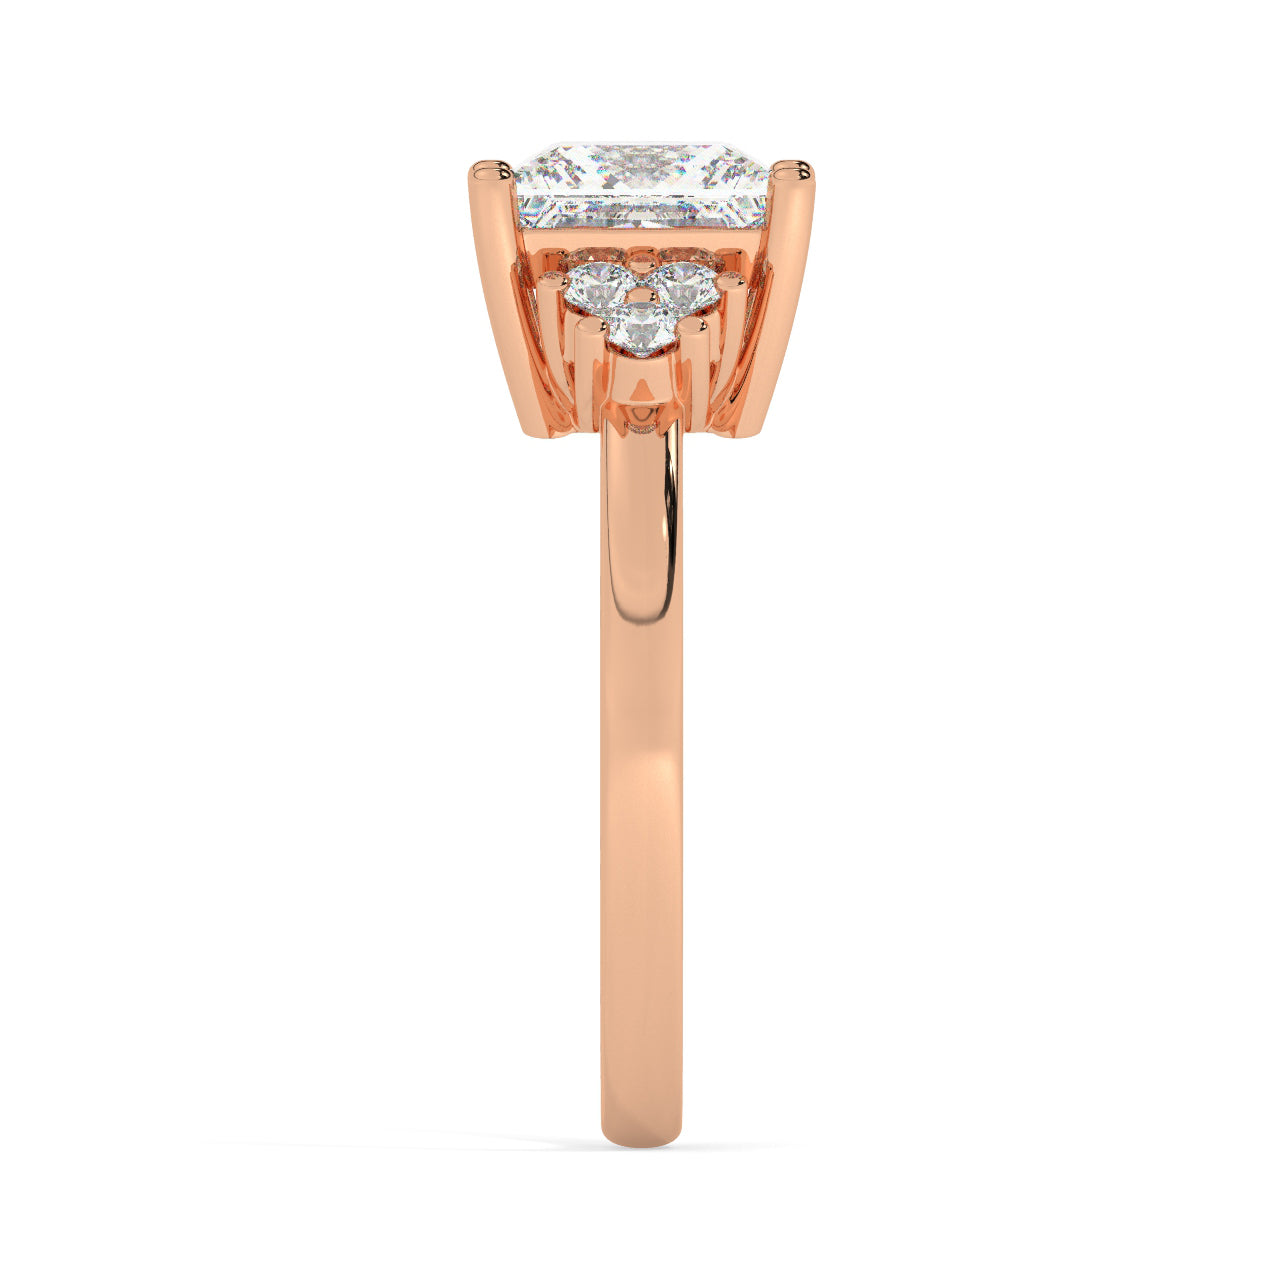 Rose Gold Princess Cut Engagement Ring Accompanied by Round Stones - Other Side View